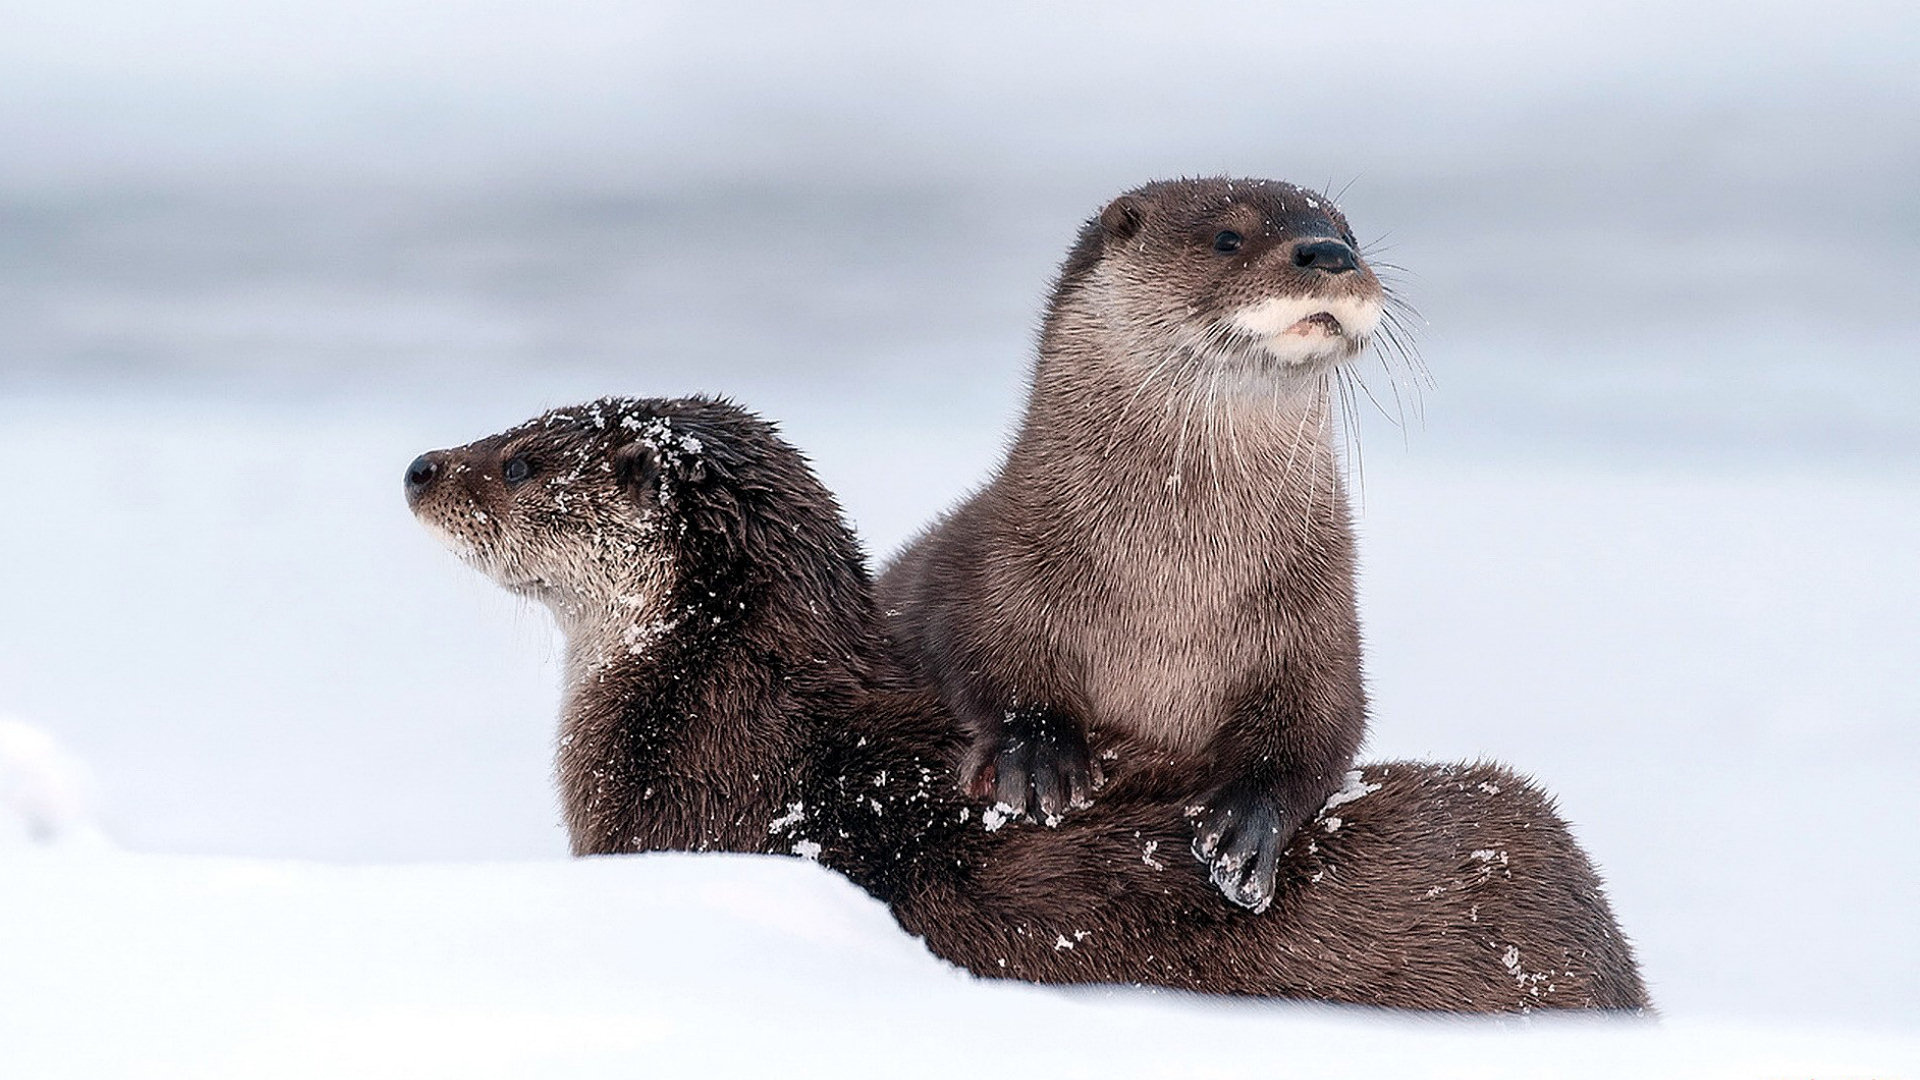 Otter wallpapers, Playful nature, Cute and cuddly, Beautiful backgrounds, 1920x1080 Full HD Desktop